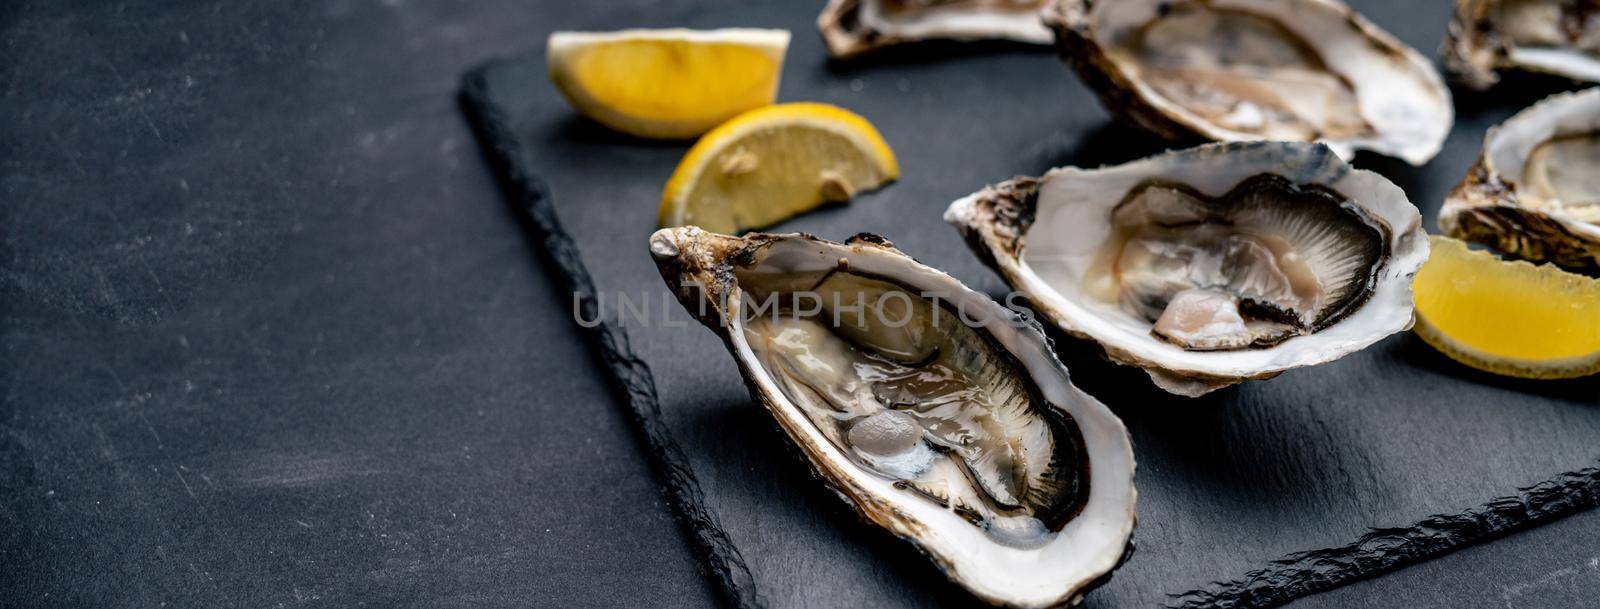 Fresh oysters with lemon served on balck platter. Luxury seafood diet